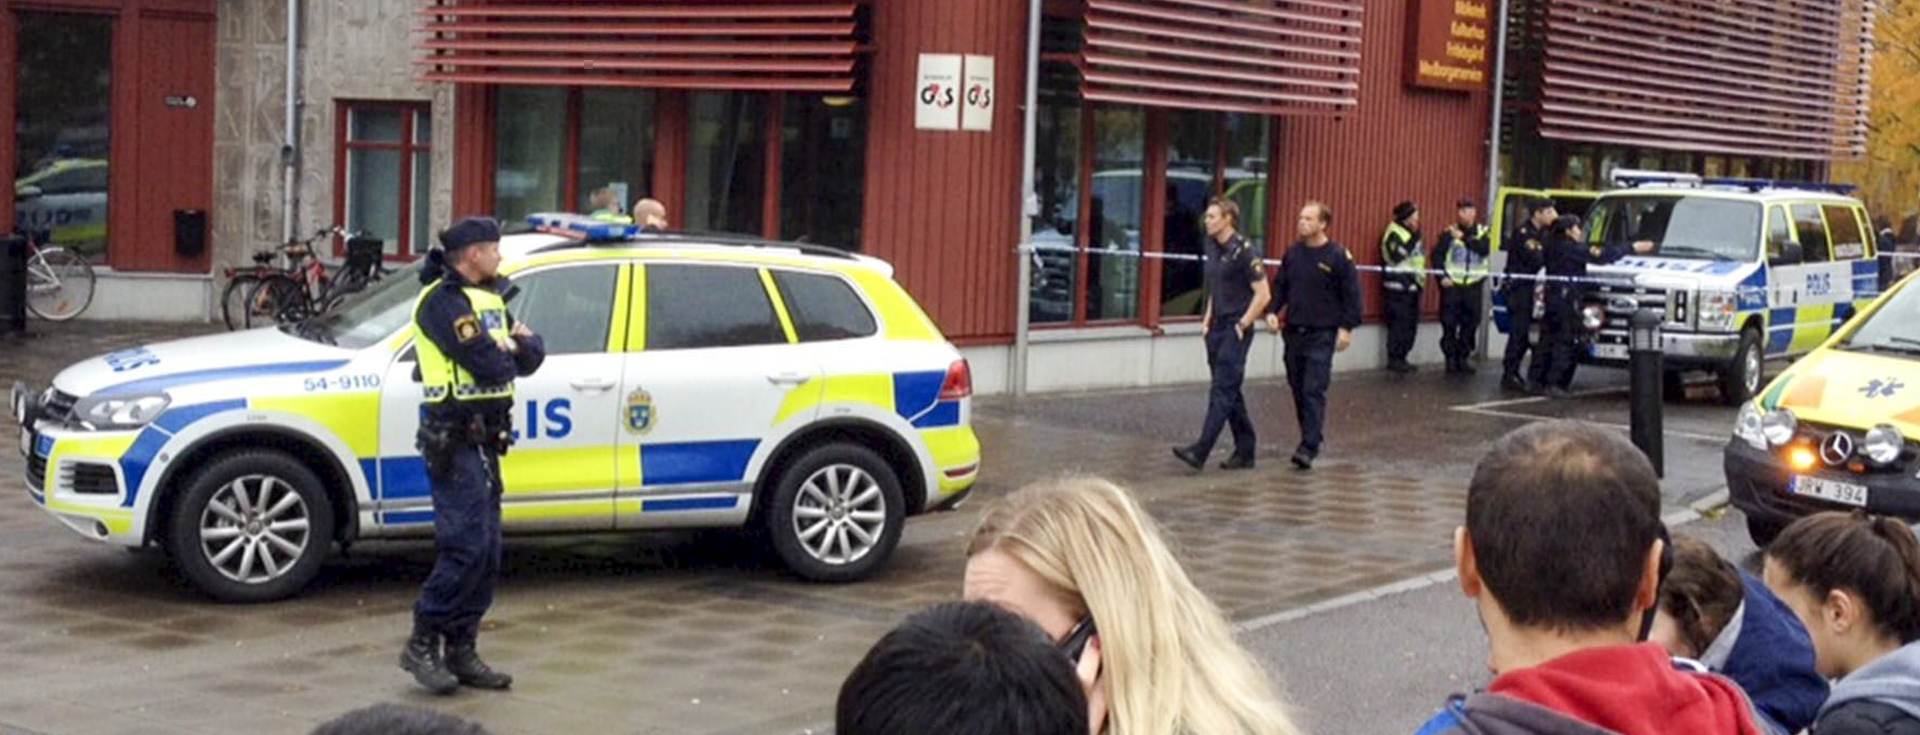 epa04988510 Swedish police at the scene after a masked man attacked people with a sword at the Kronan school in Trollhaettan in western Sweden 22 October 2015. Reports state that at least six people were injured, and the offender was shot by the police.  EPA/STIG HEDSTROEM SWEDEN
SWEDEN OUT